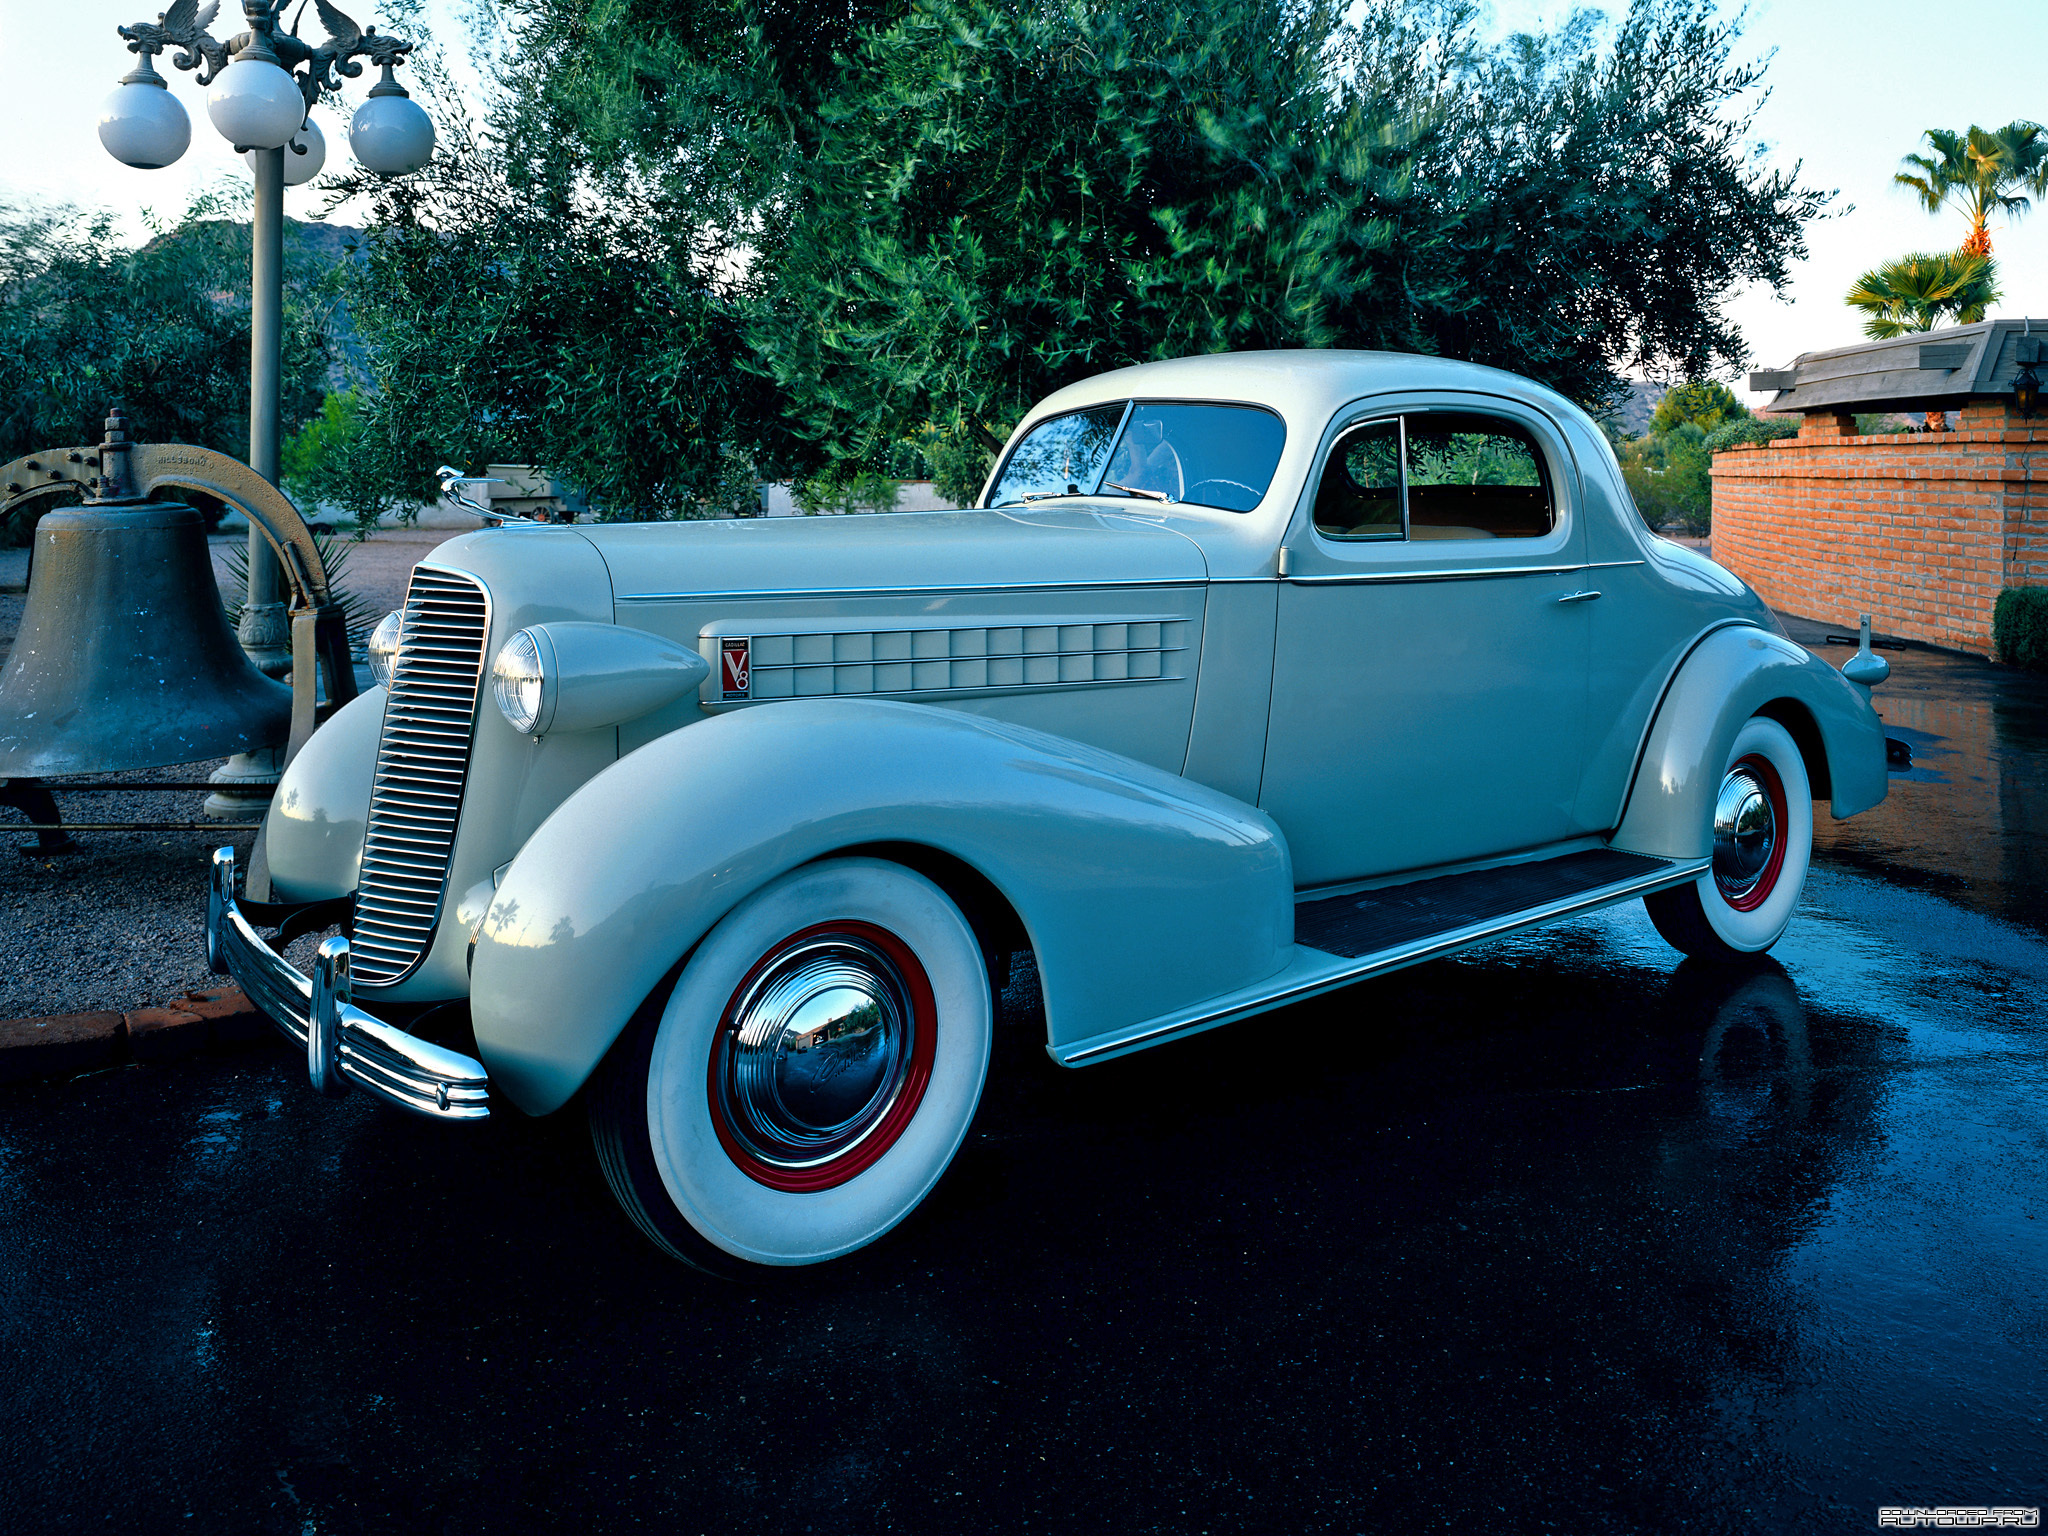 HQ 1936 Cadillac V8 Series 70 Coupe Wallpapers | File 1714.35Kb